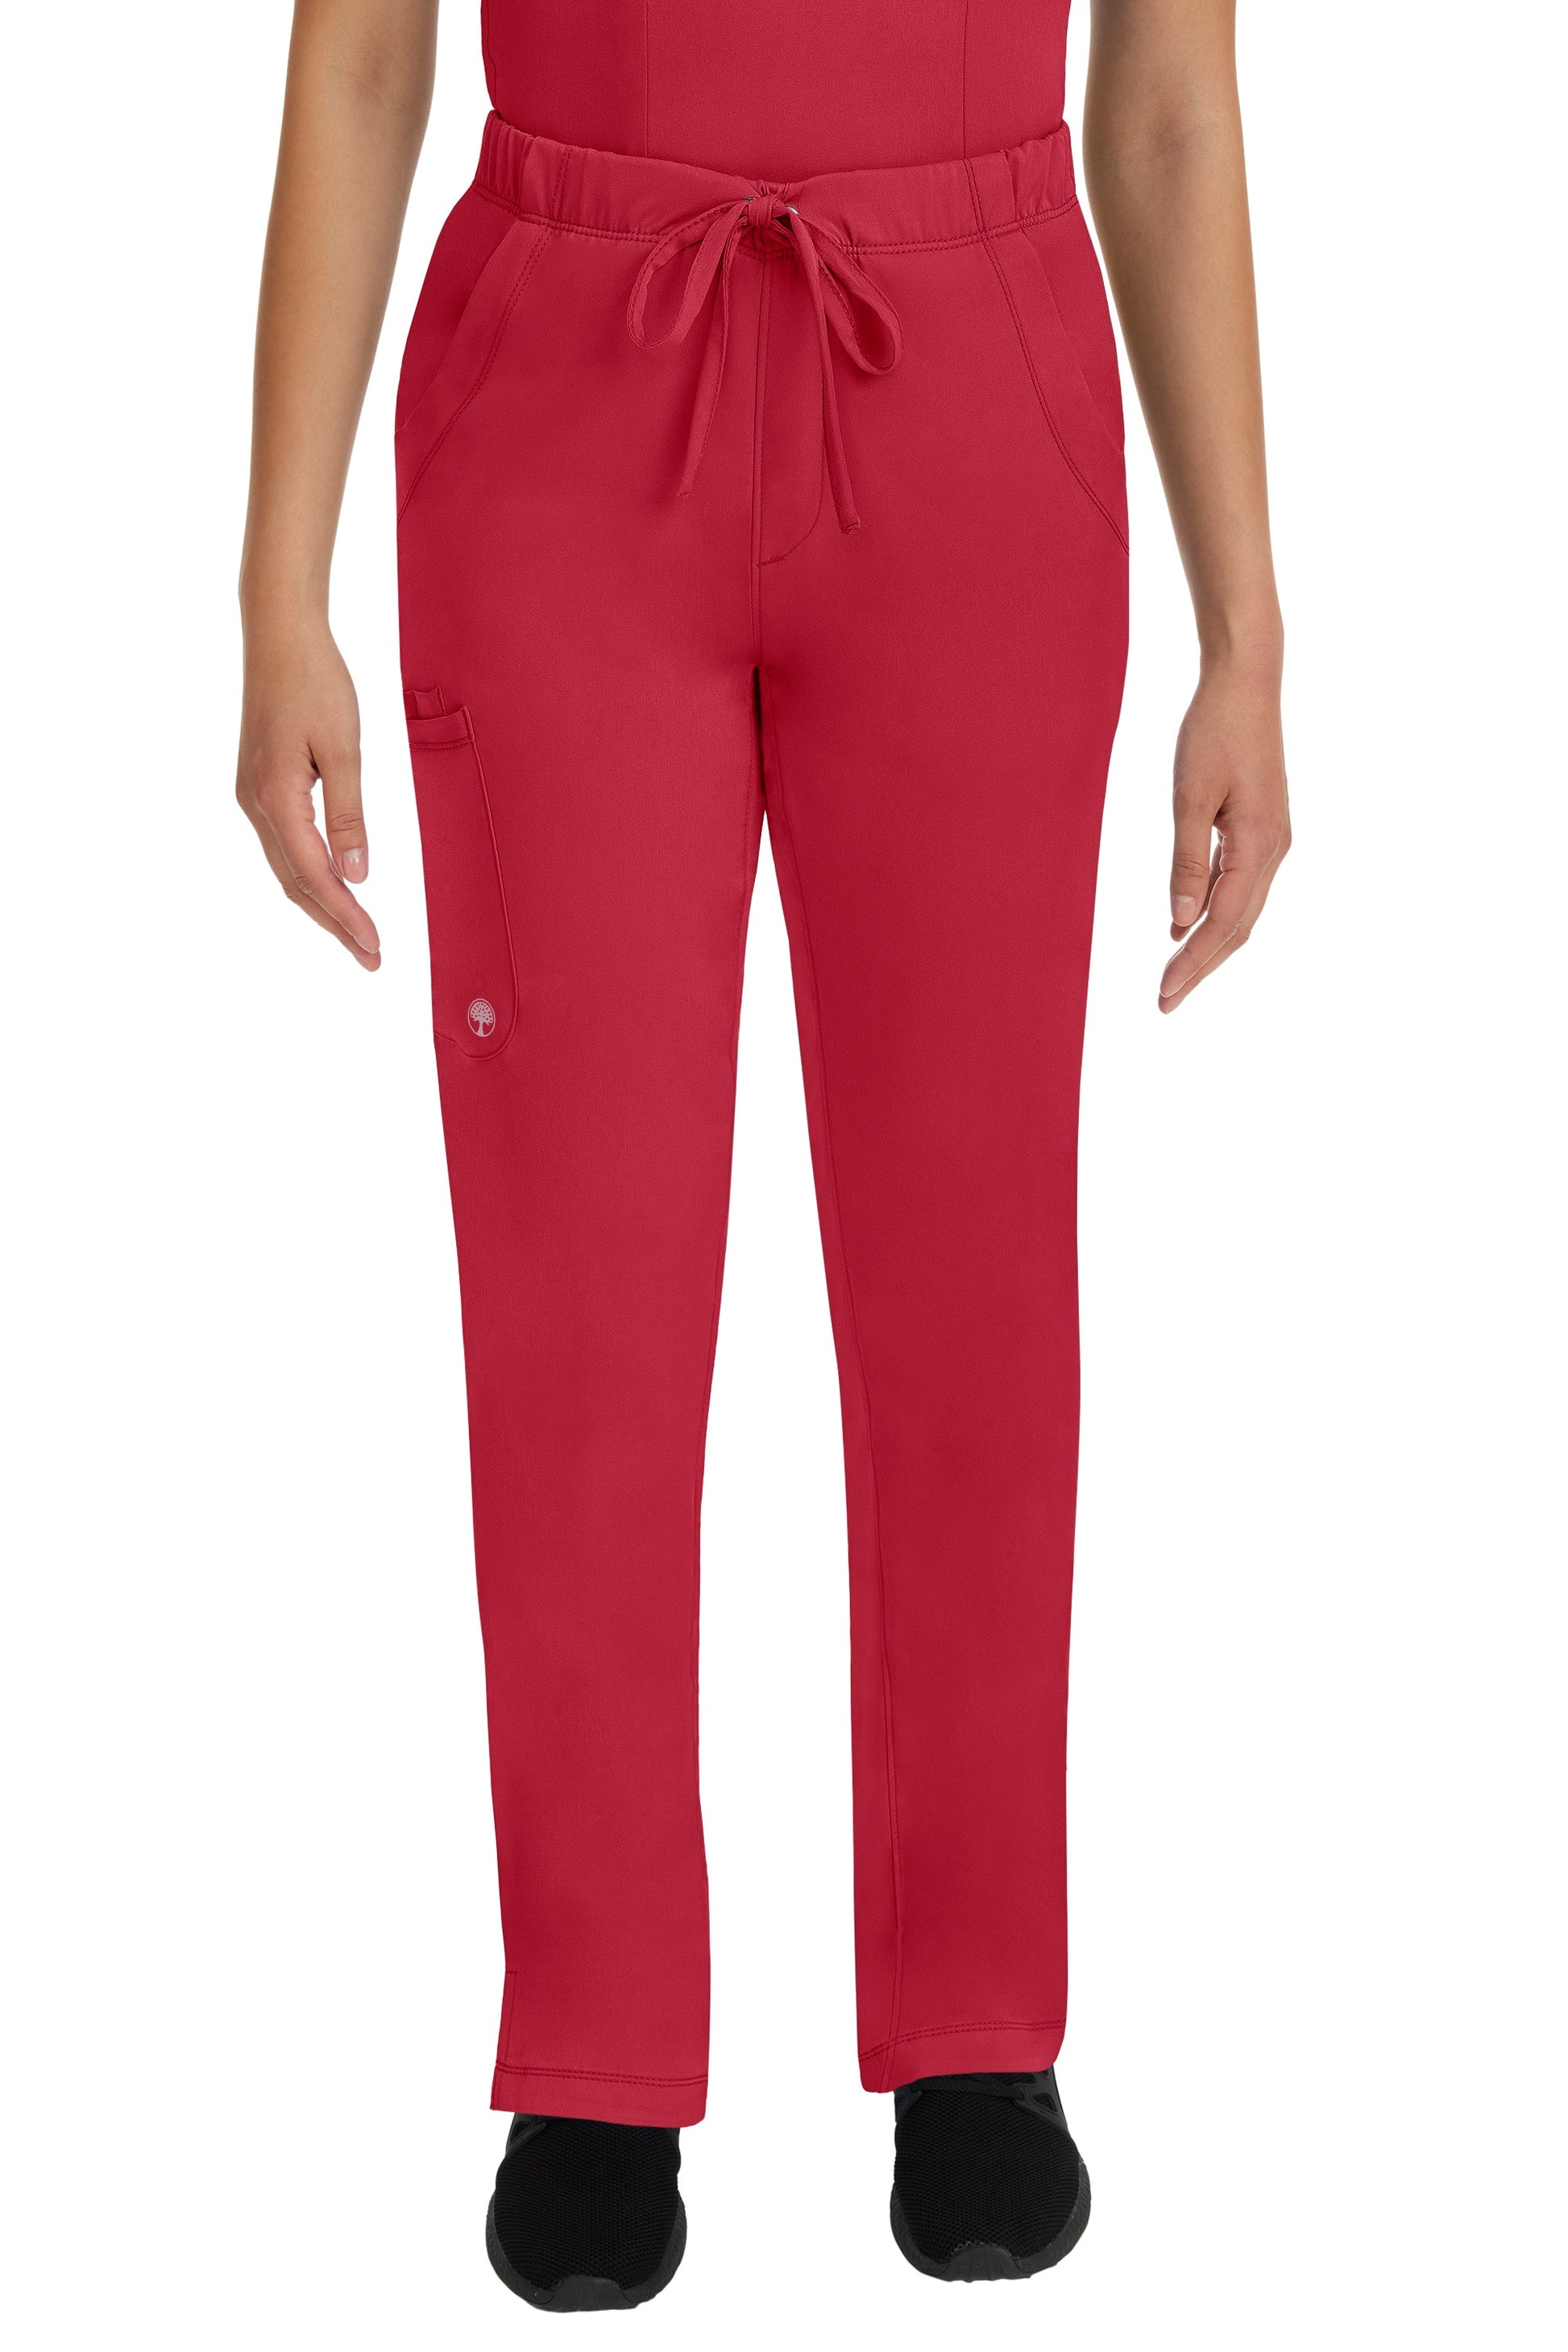 Healing Hands HH Works Rebecca Tall Scrub Pant in Red at Parker's Clothing and Shoes.